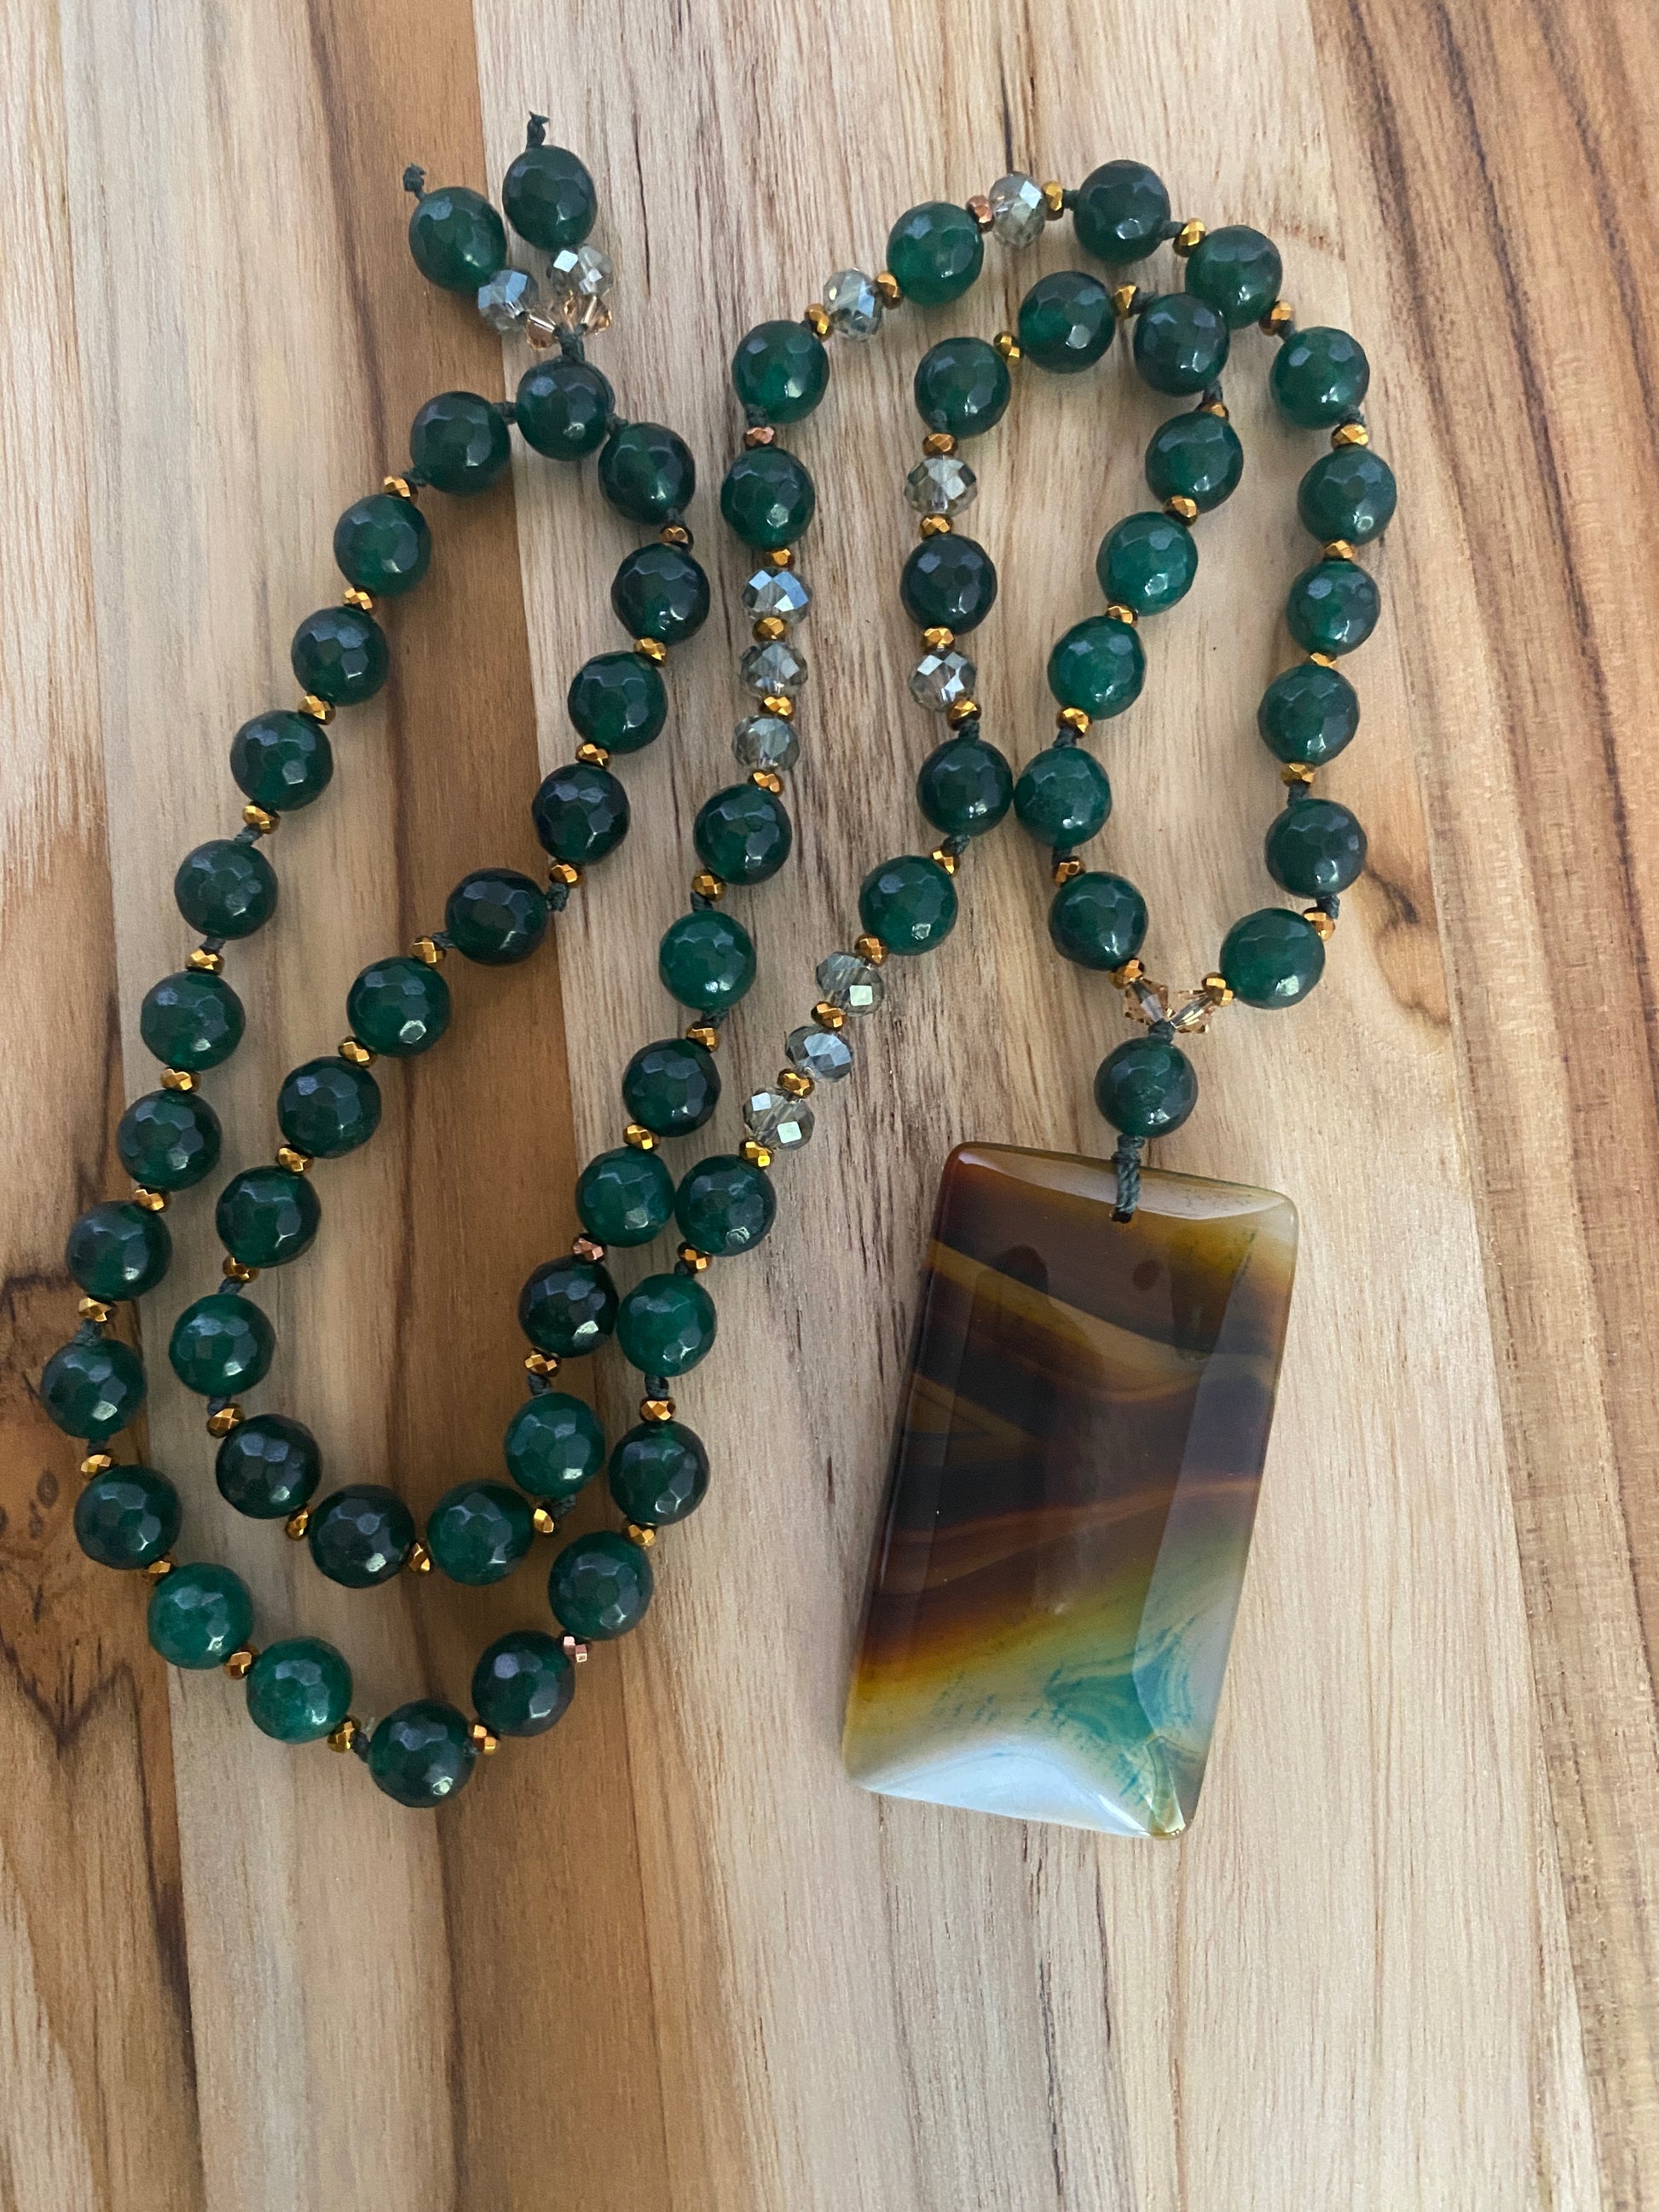 28" Long Brown & Green Agate Pendant Beaded Necklace with Green Agate & Crystal Beads - My Urban Gems